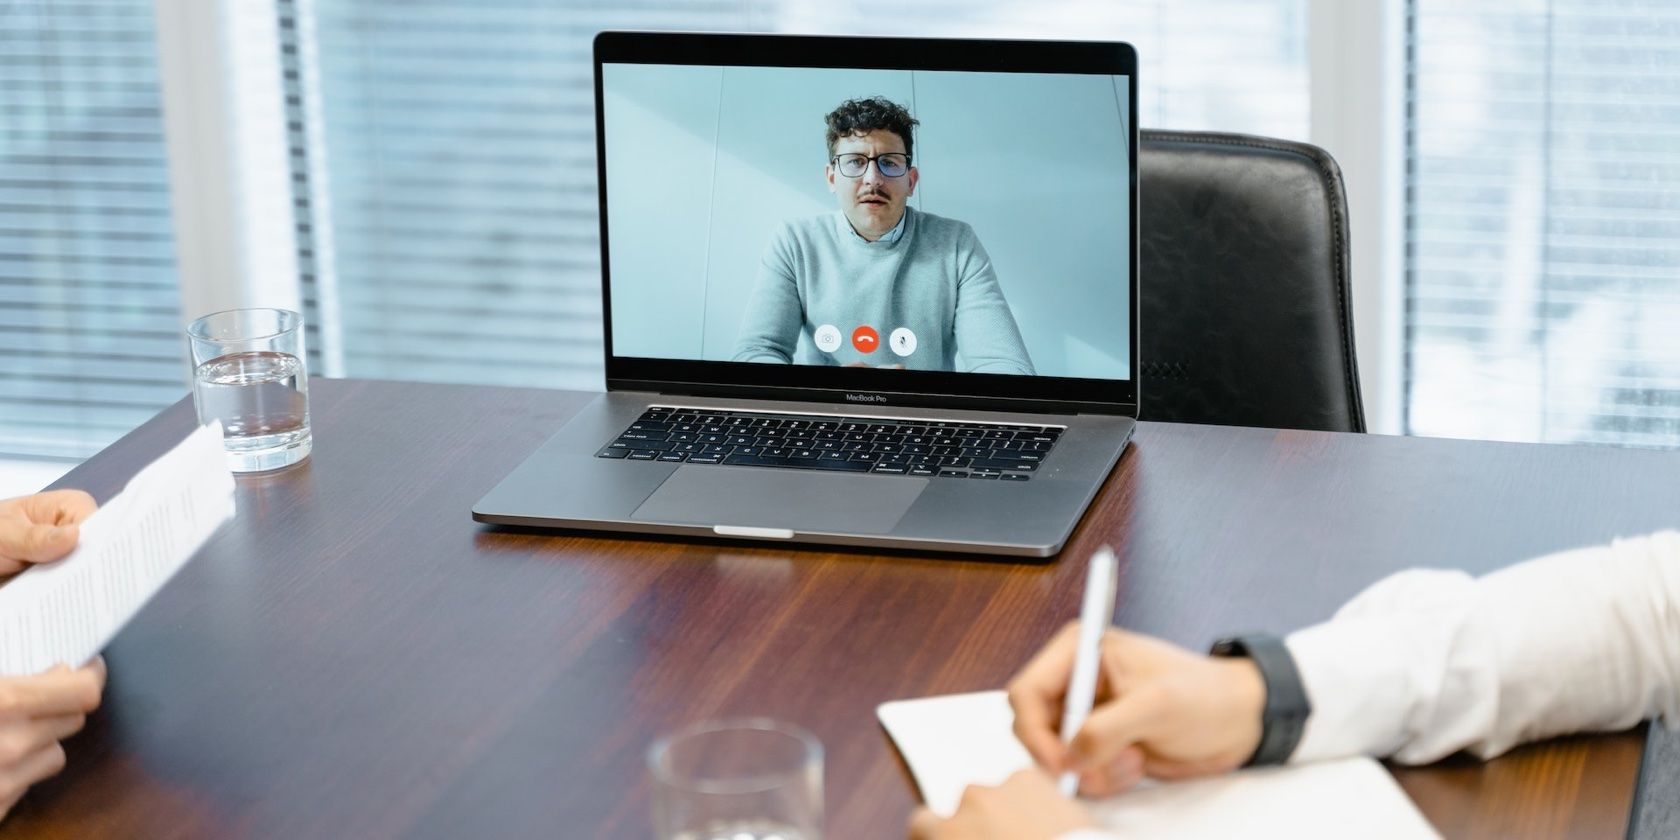 Two people in an online meeting